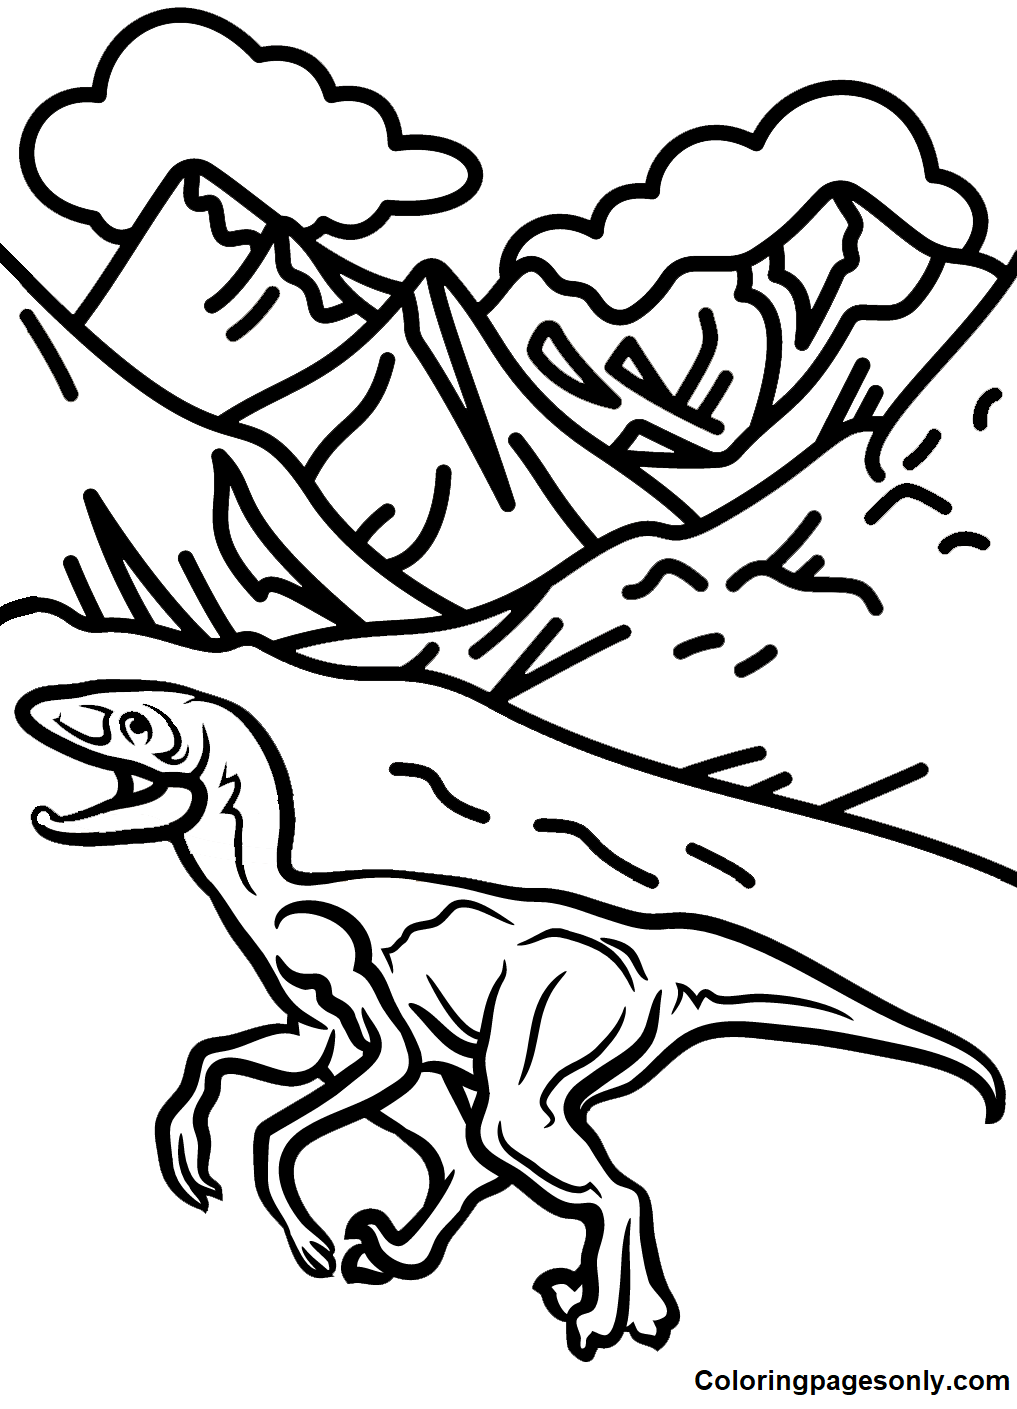 Velociraptor Picture Coloring Pages